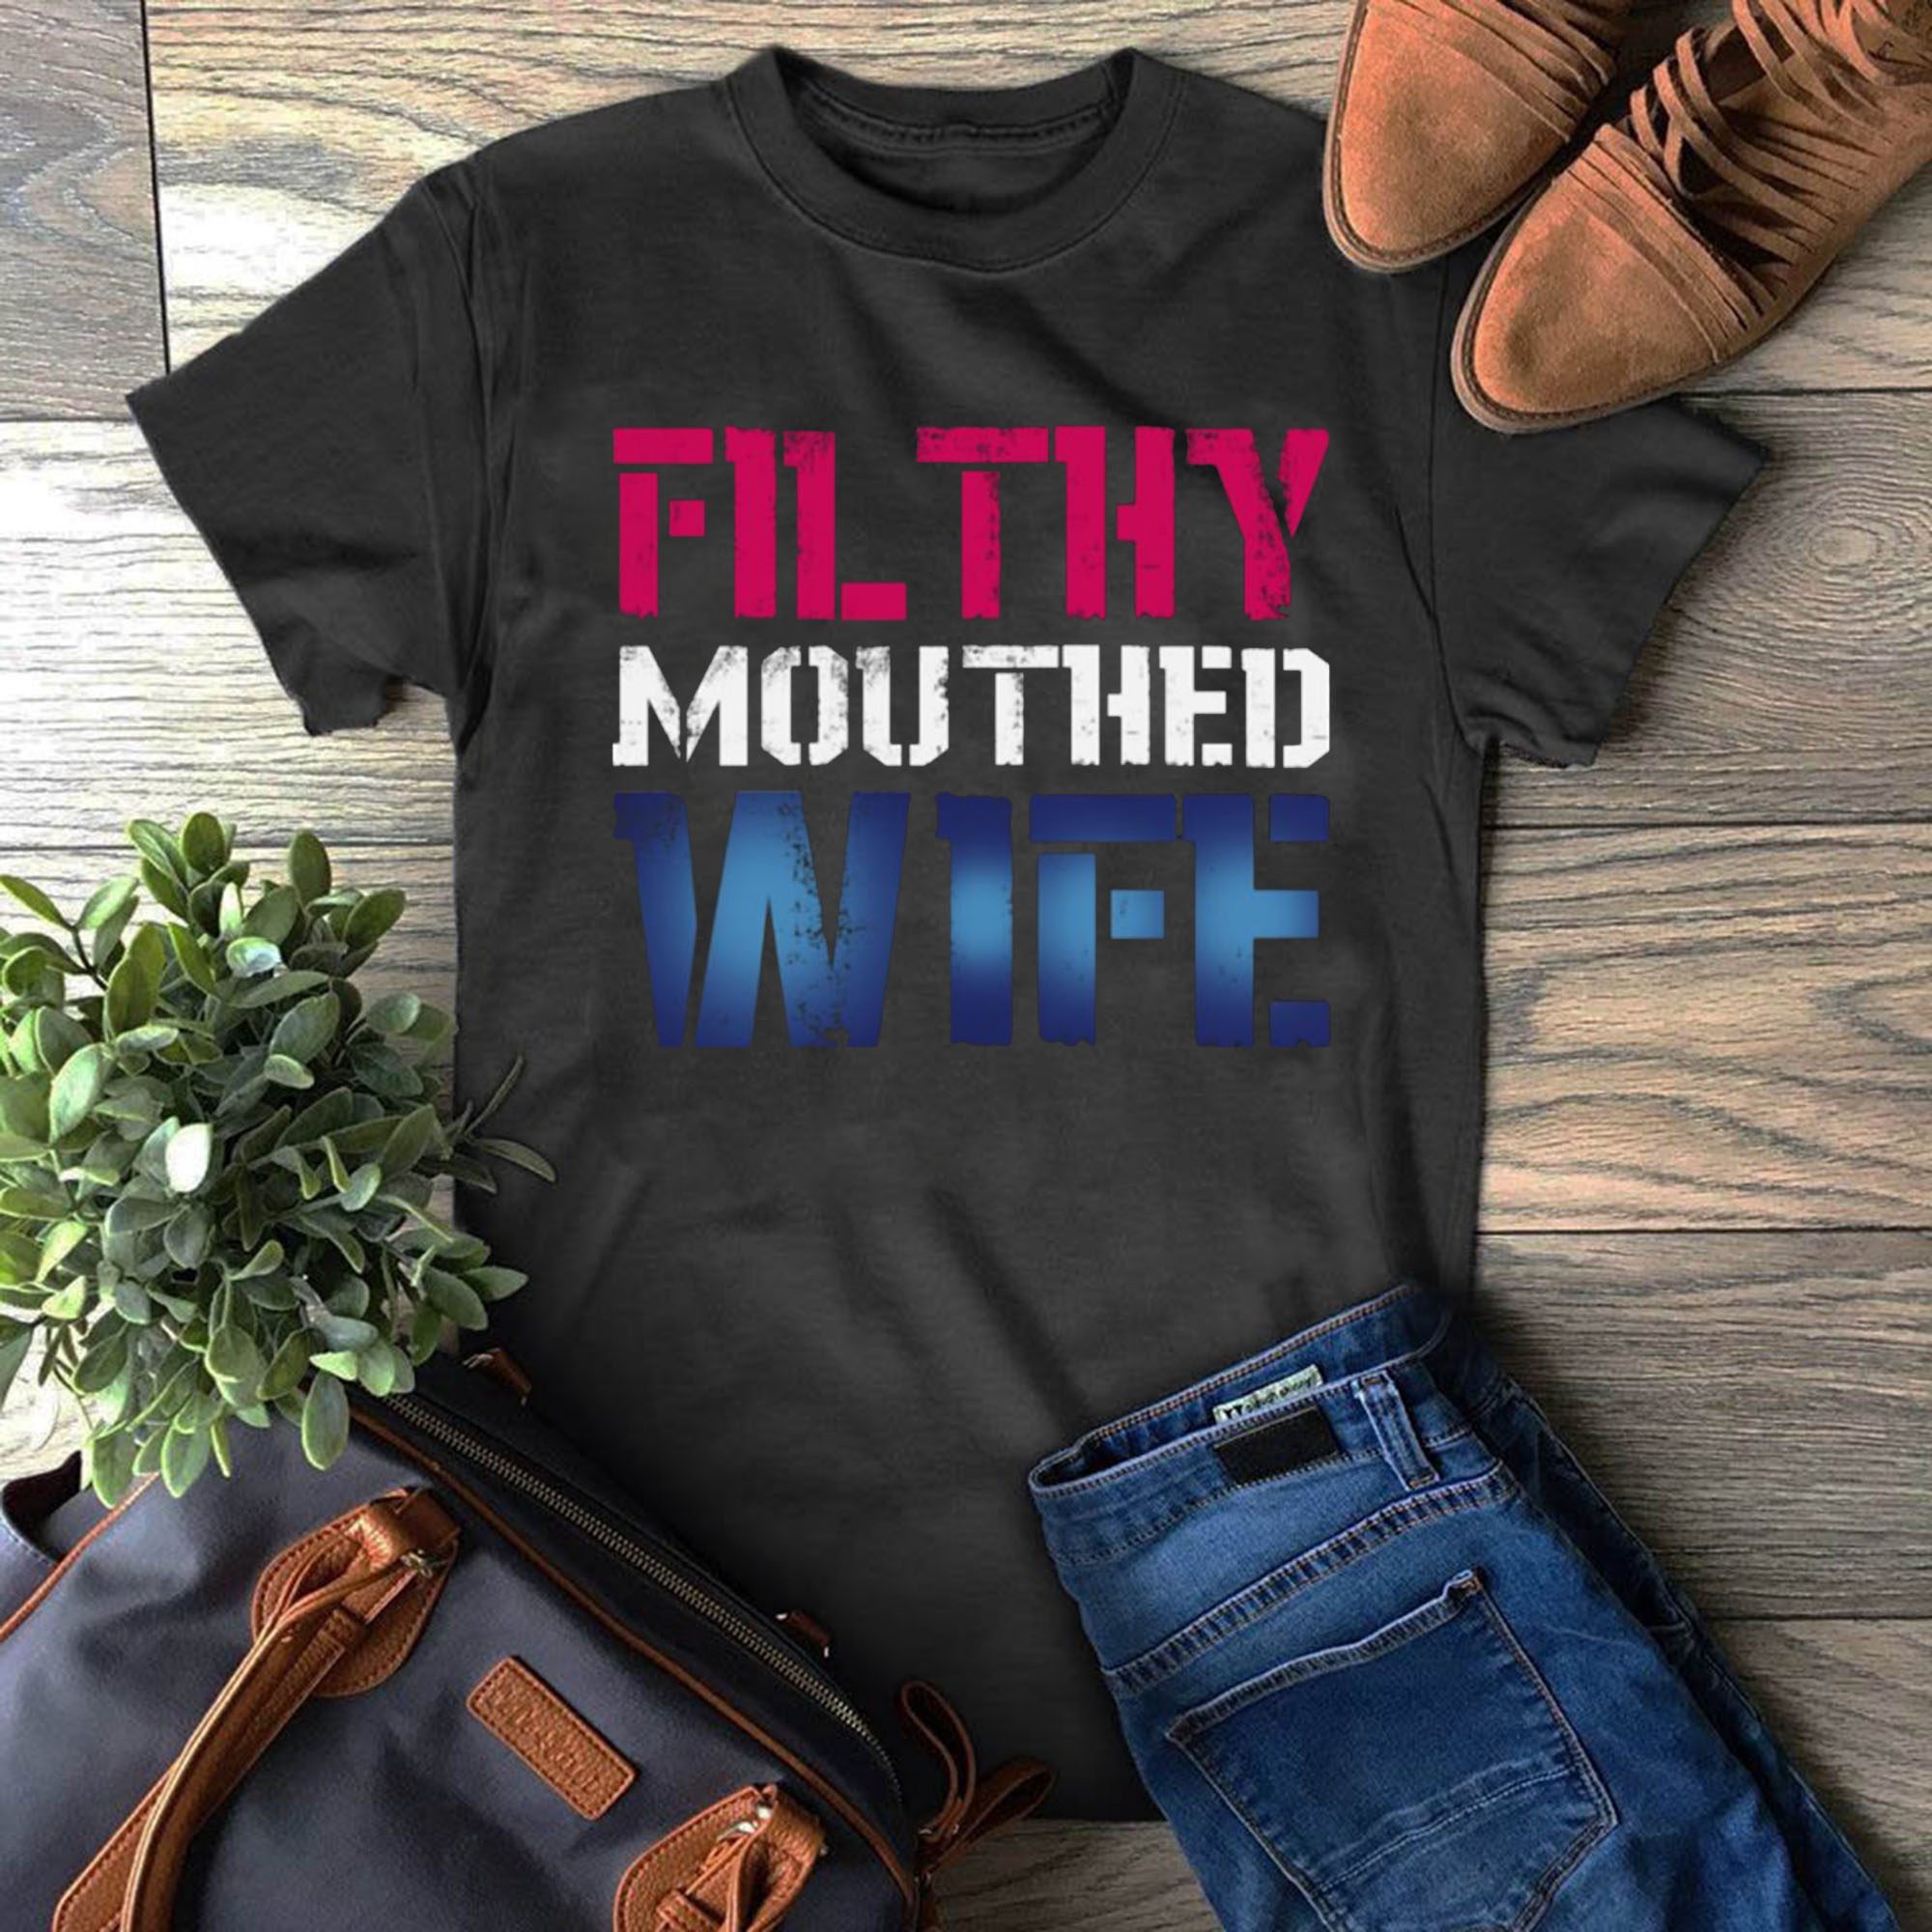 Filthy Mouthed Wife Limited Edition Tee Shirt Hoodie Tank-Top Quotes picture